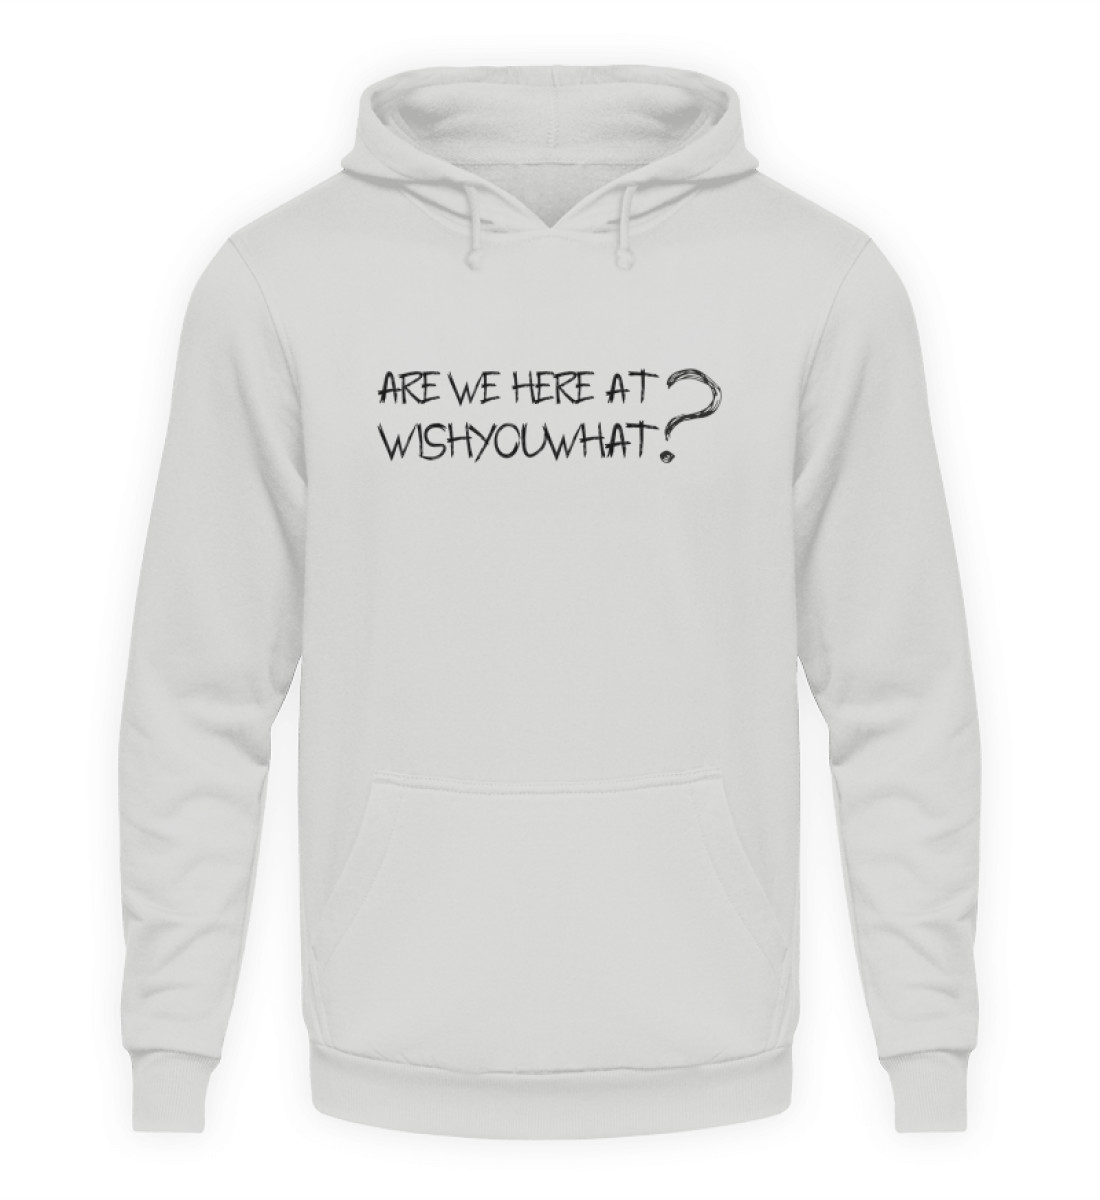 ARE WE HERE AT WISHYOUWHAT? - Unisex Kapuzenpullover Hoodie-23